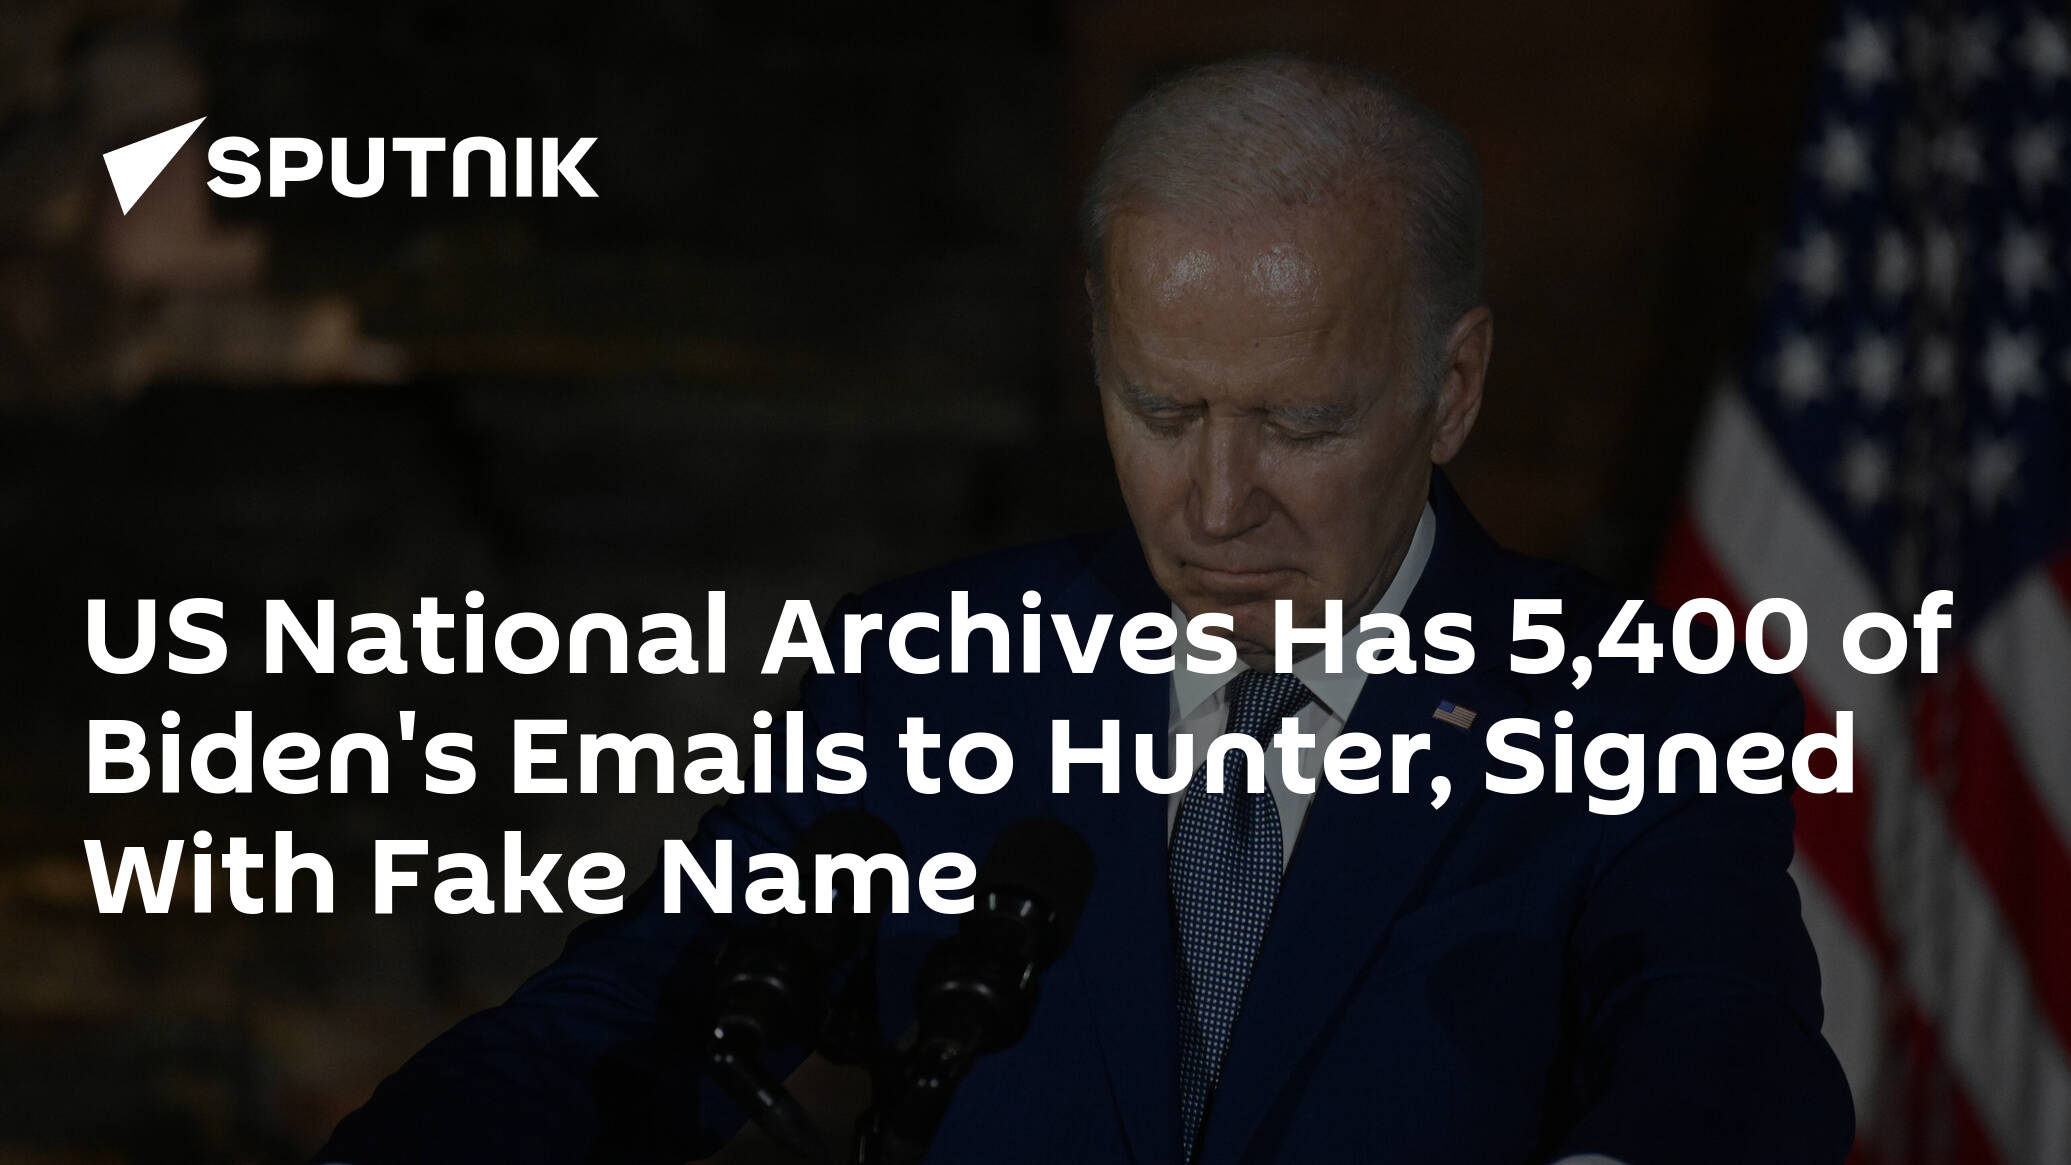 US National Archives Has 5,400 Biden's Emails to Hunter, Signed by Fake Name